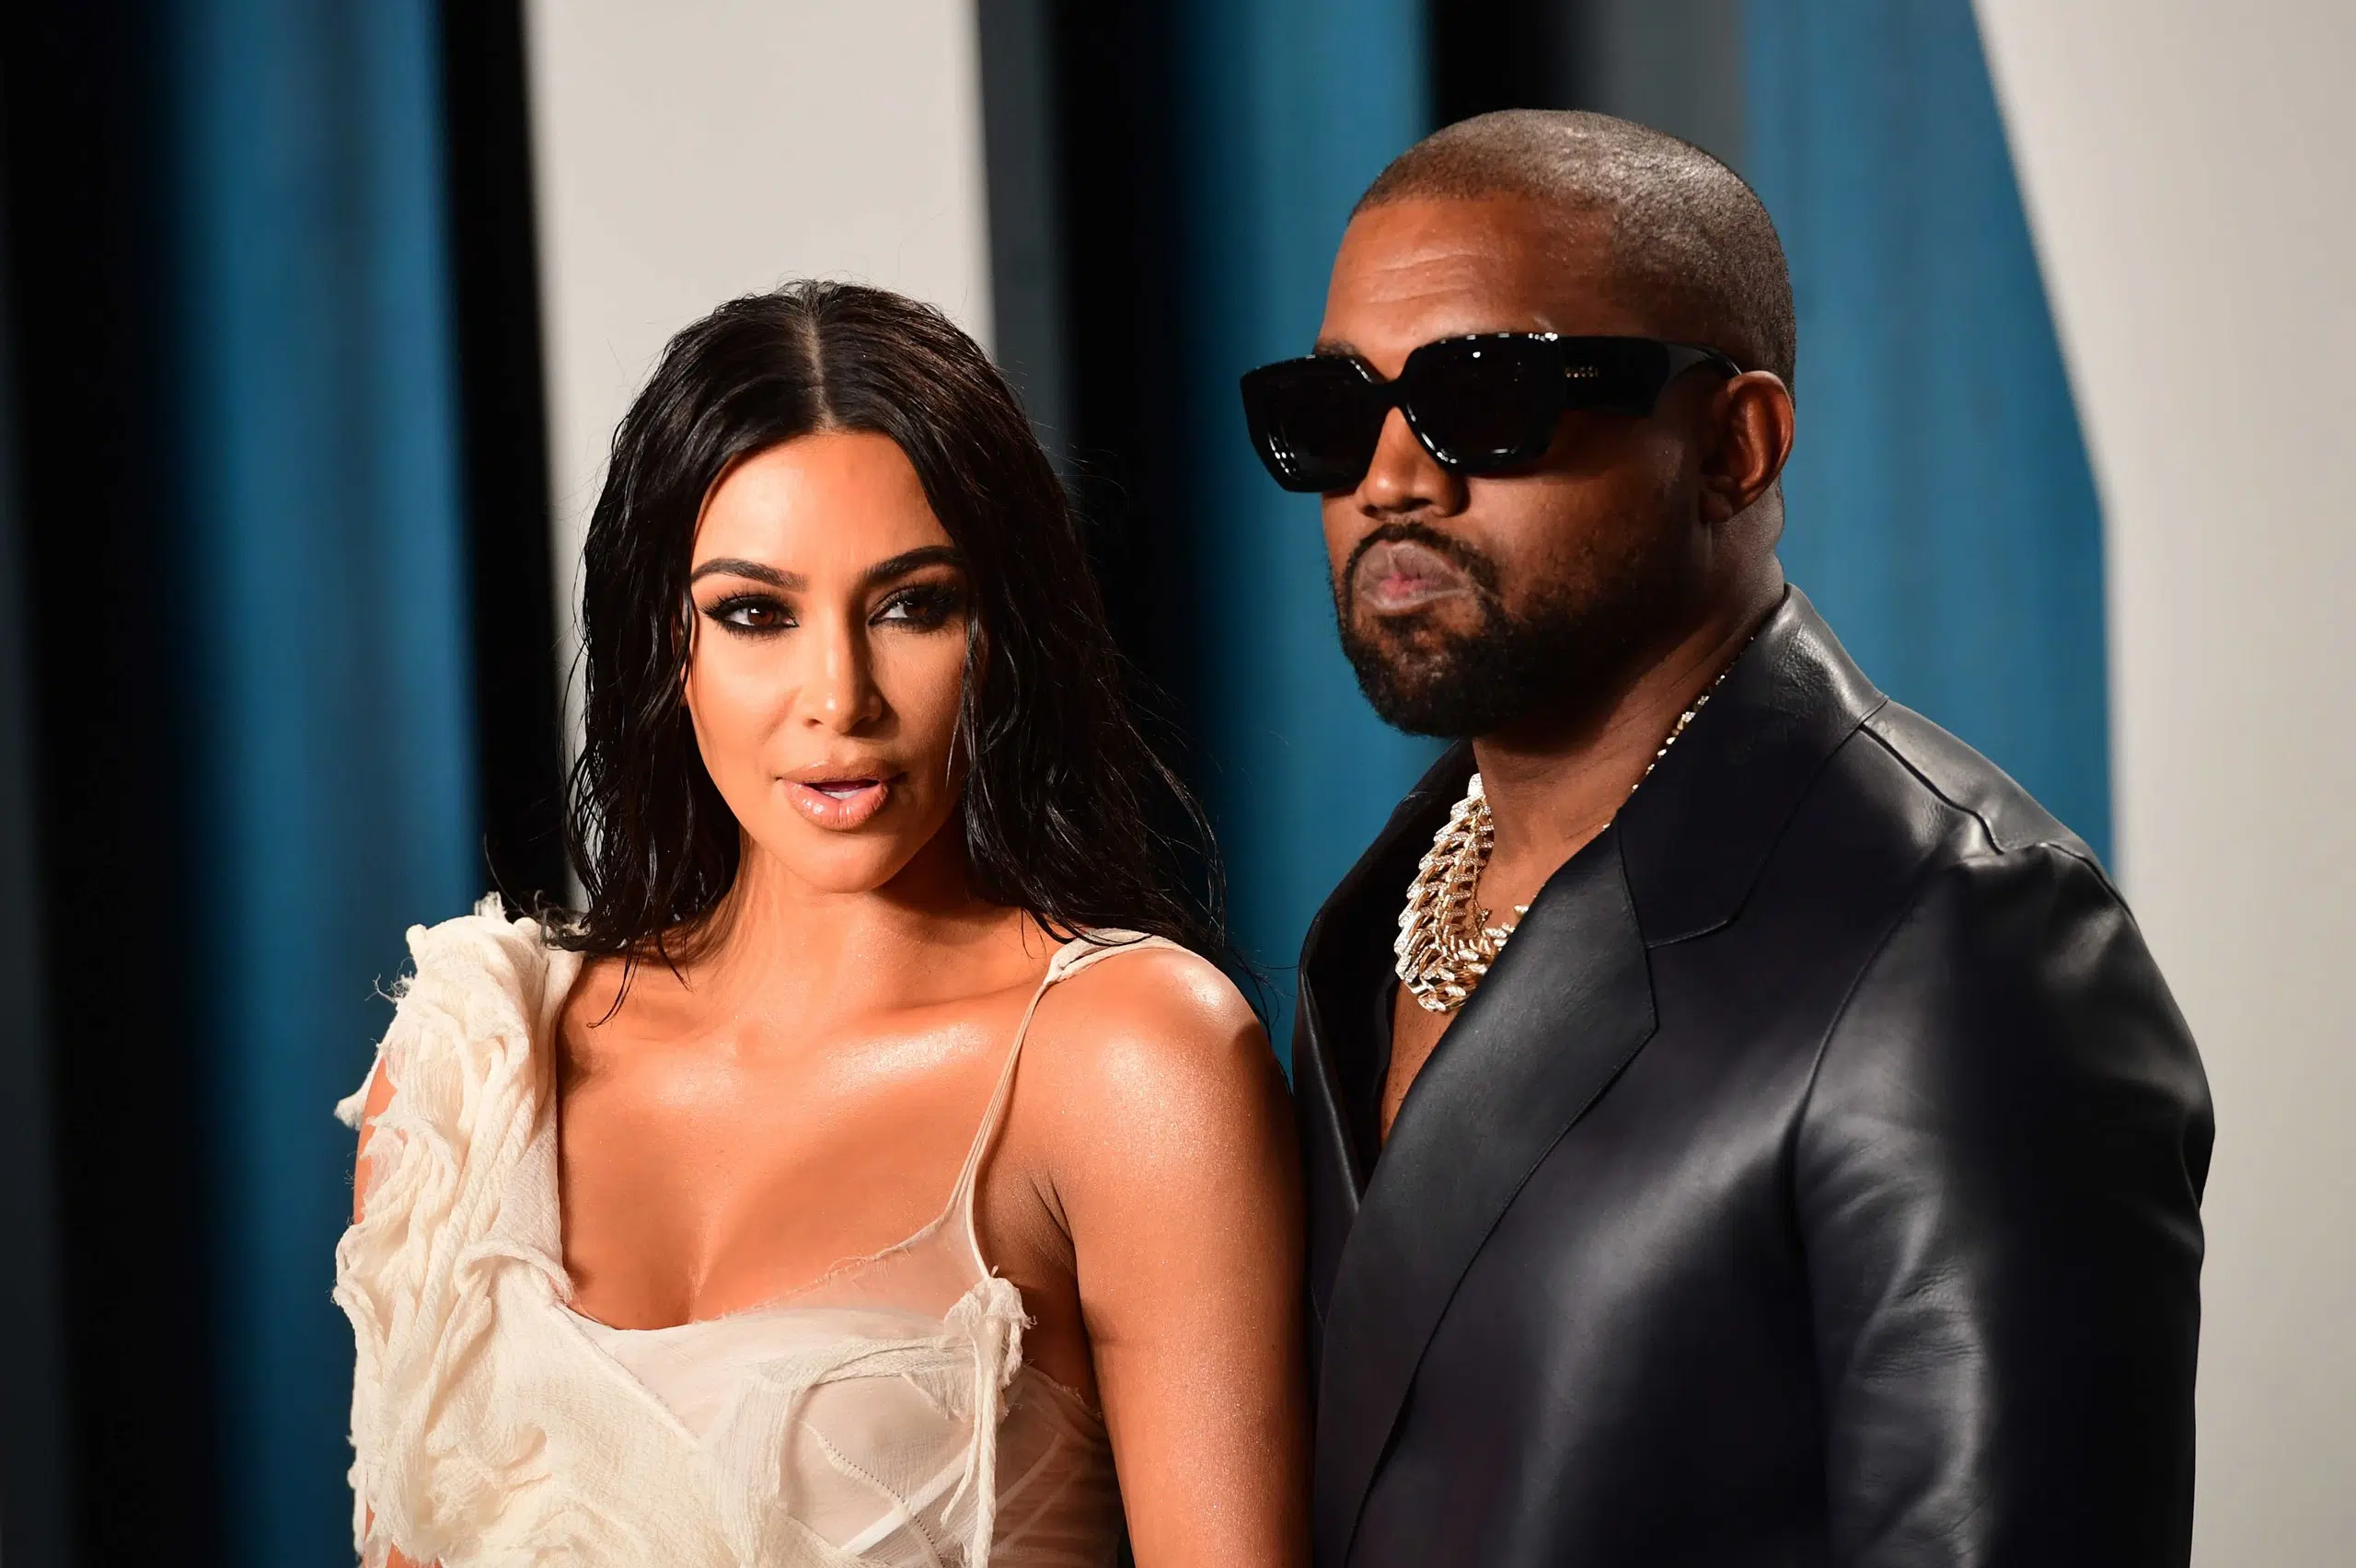 Kim Kardashian and Kanye West Are Getting Divorced: "She's Done"